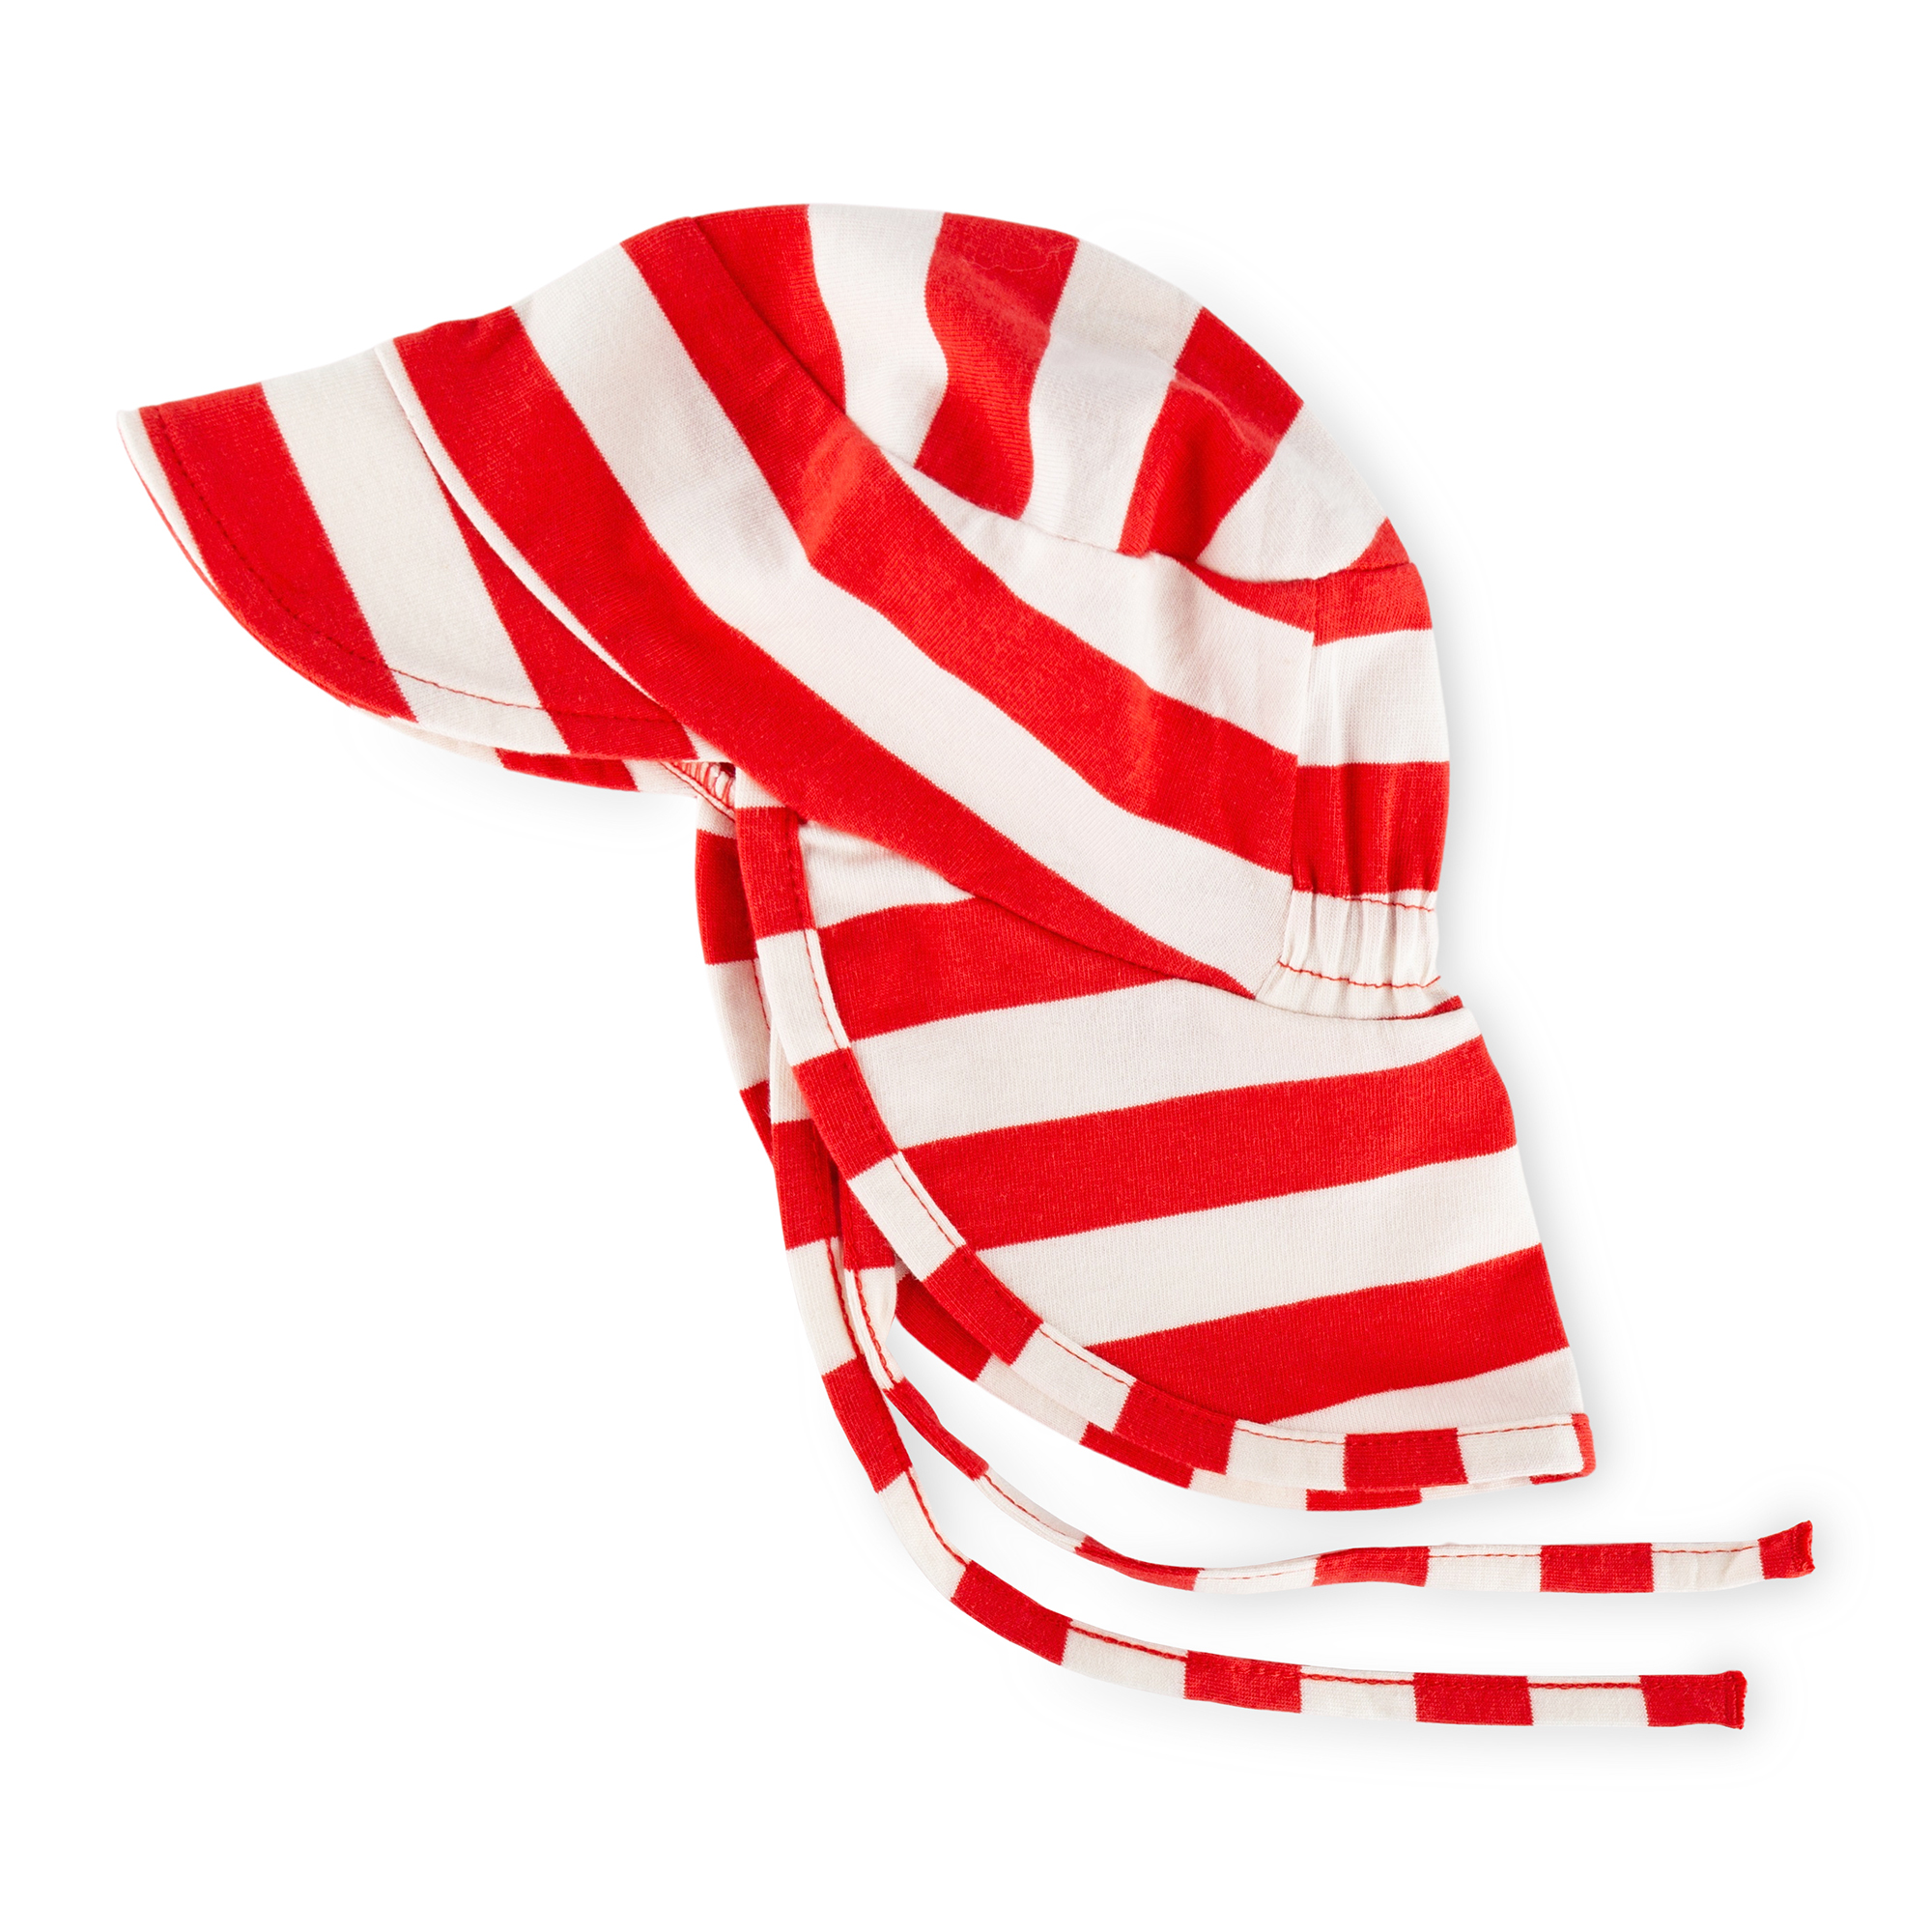 Peaked neck-flap baby sun hat red/white striped